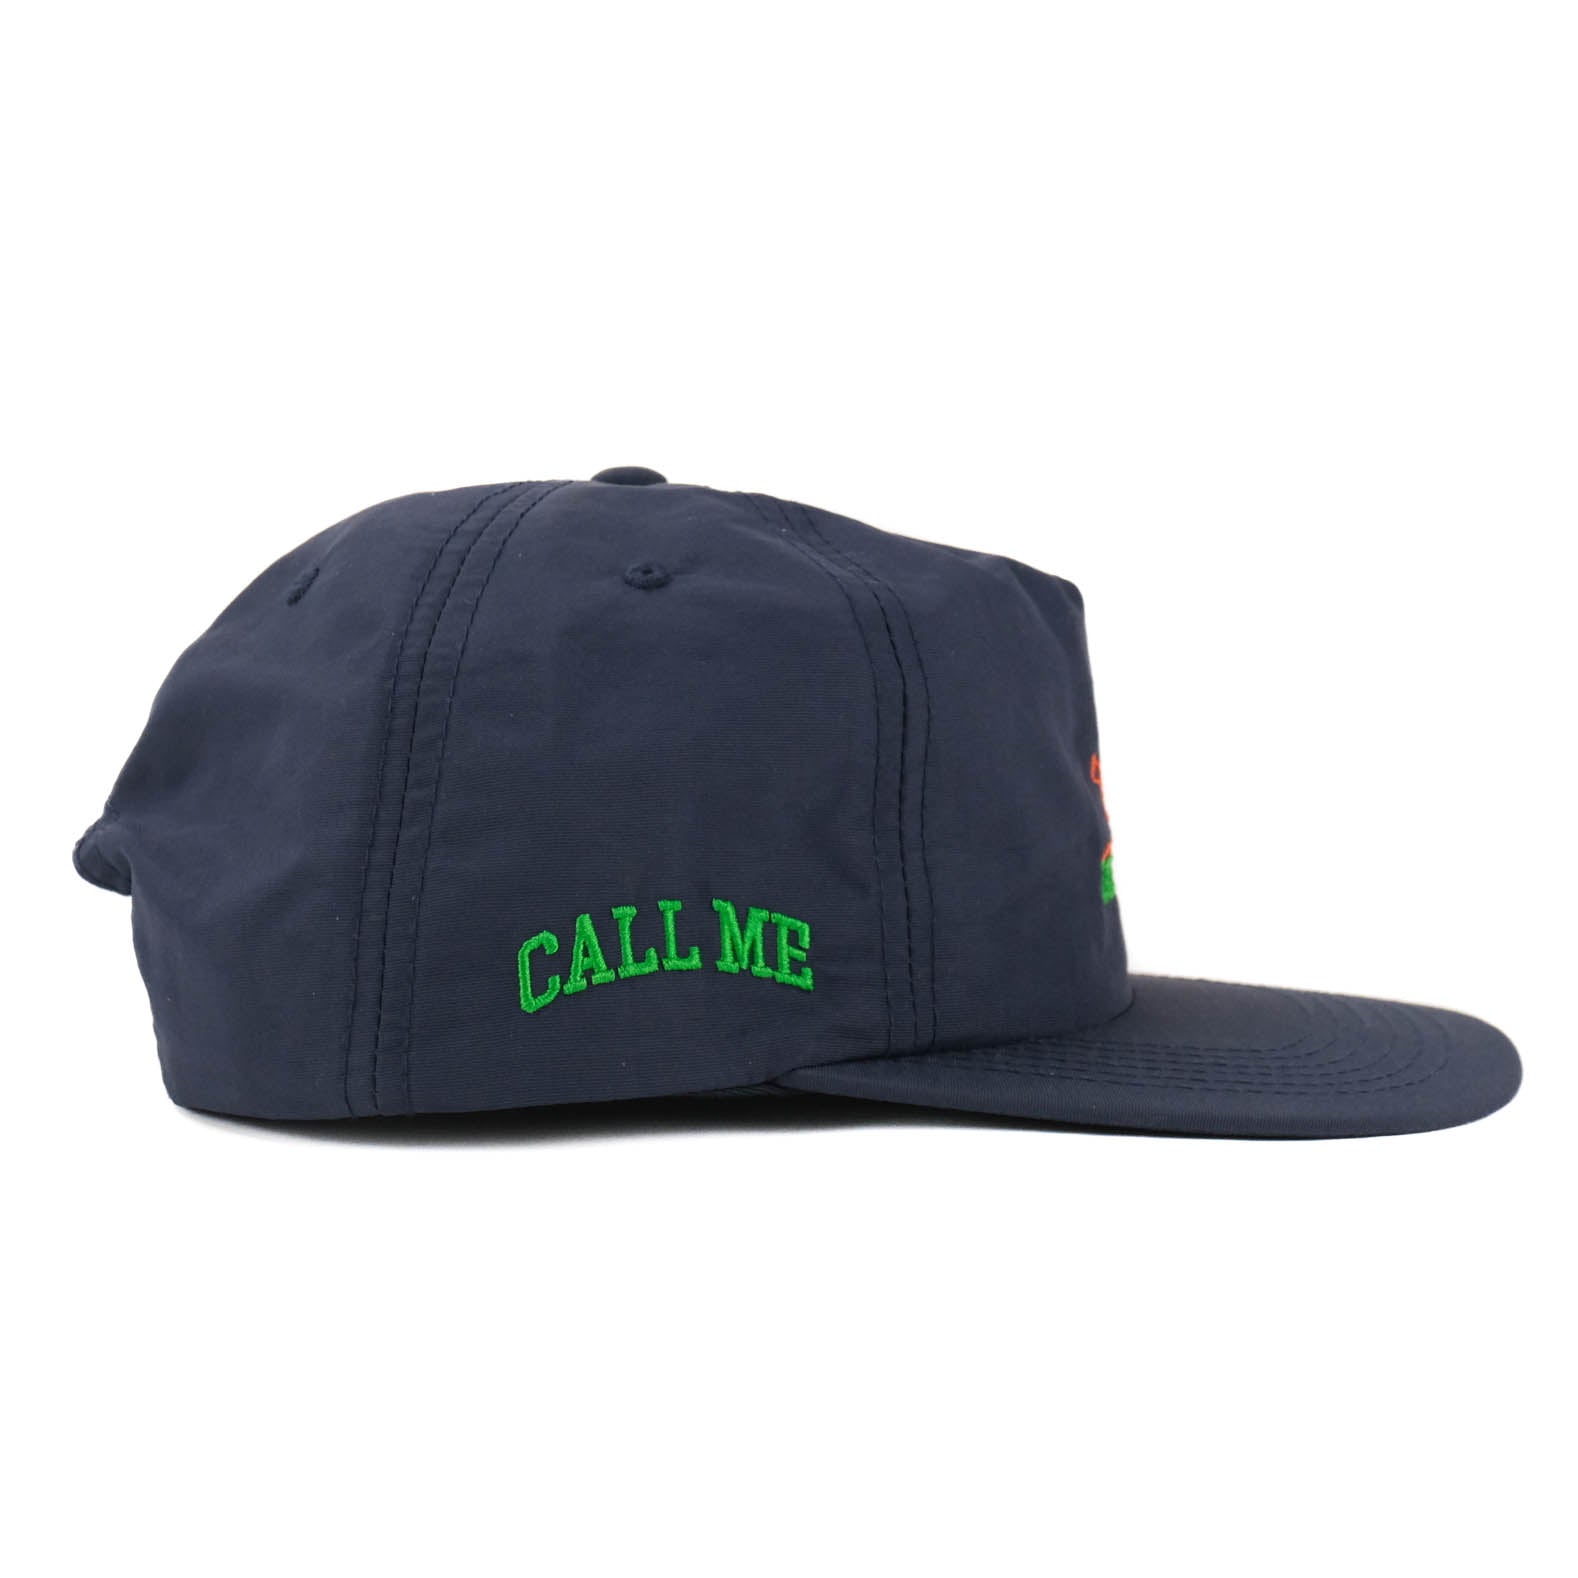 Leave a Message Snapback